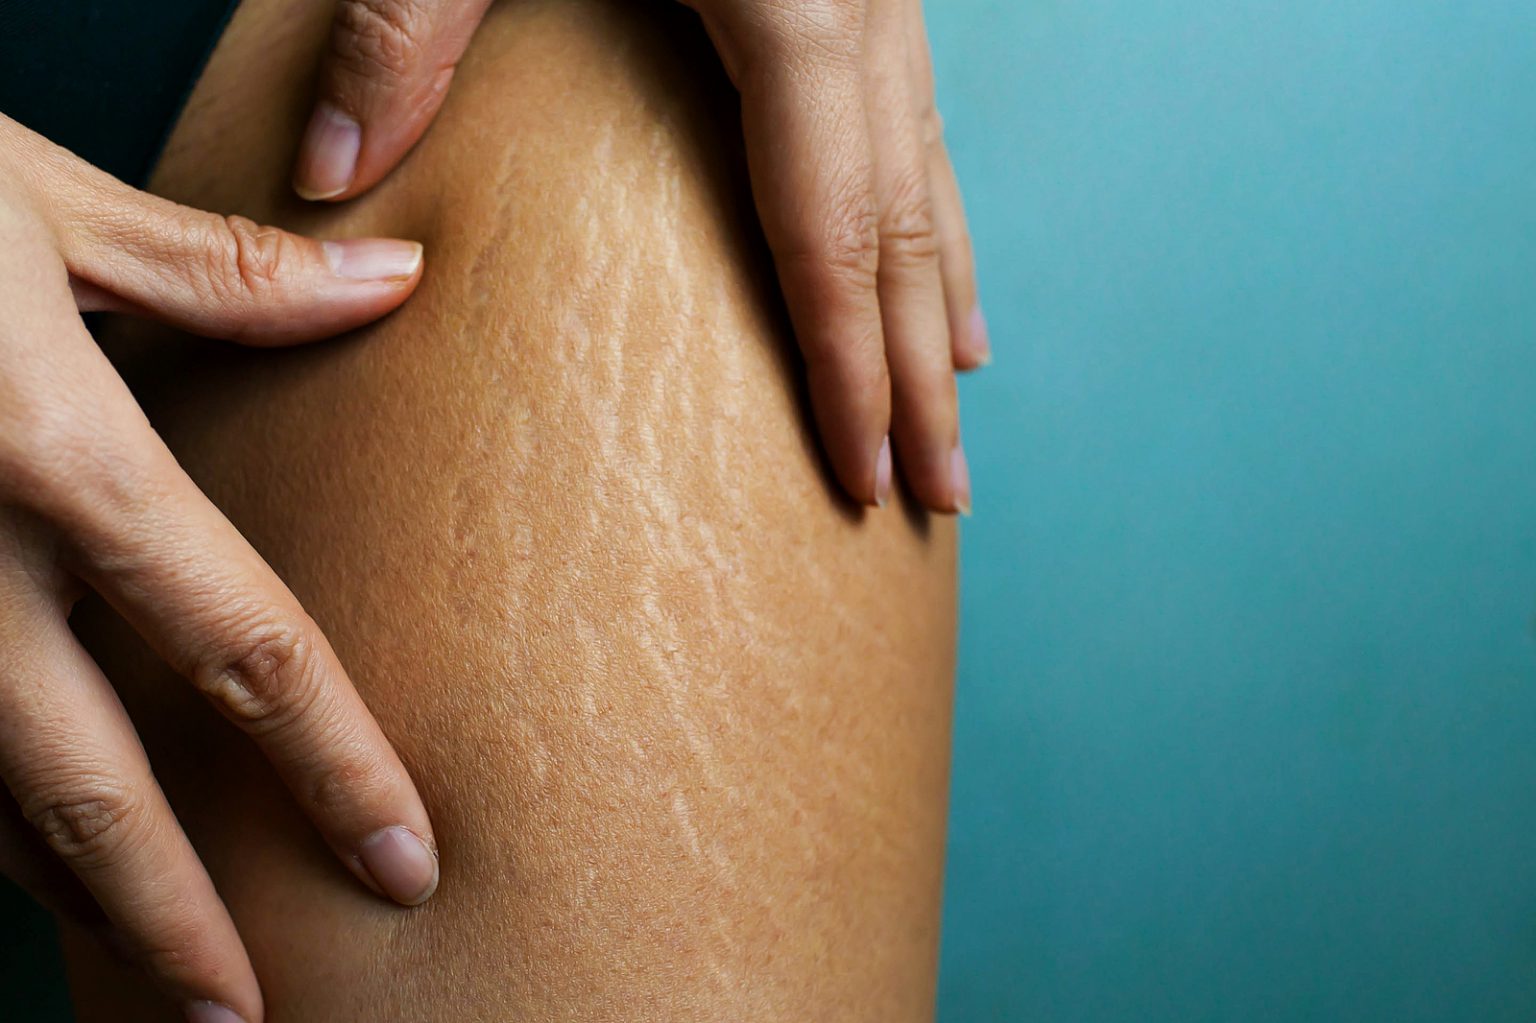 Fat Cellulite And Stretch Mark On Tan Skin Woman Leg At Home, Wo.